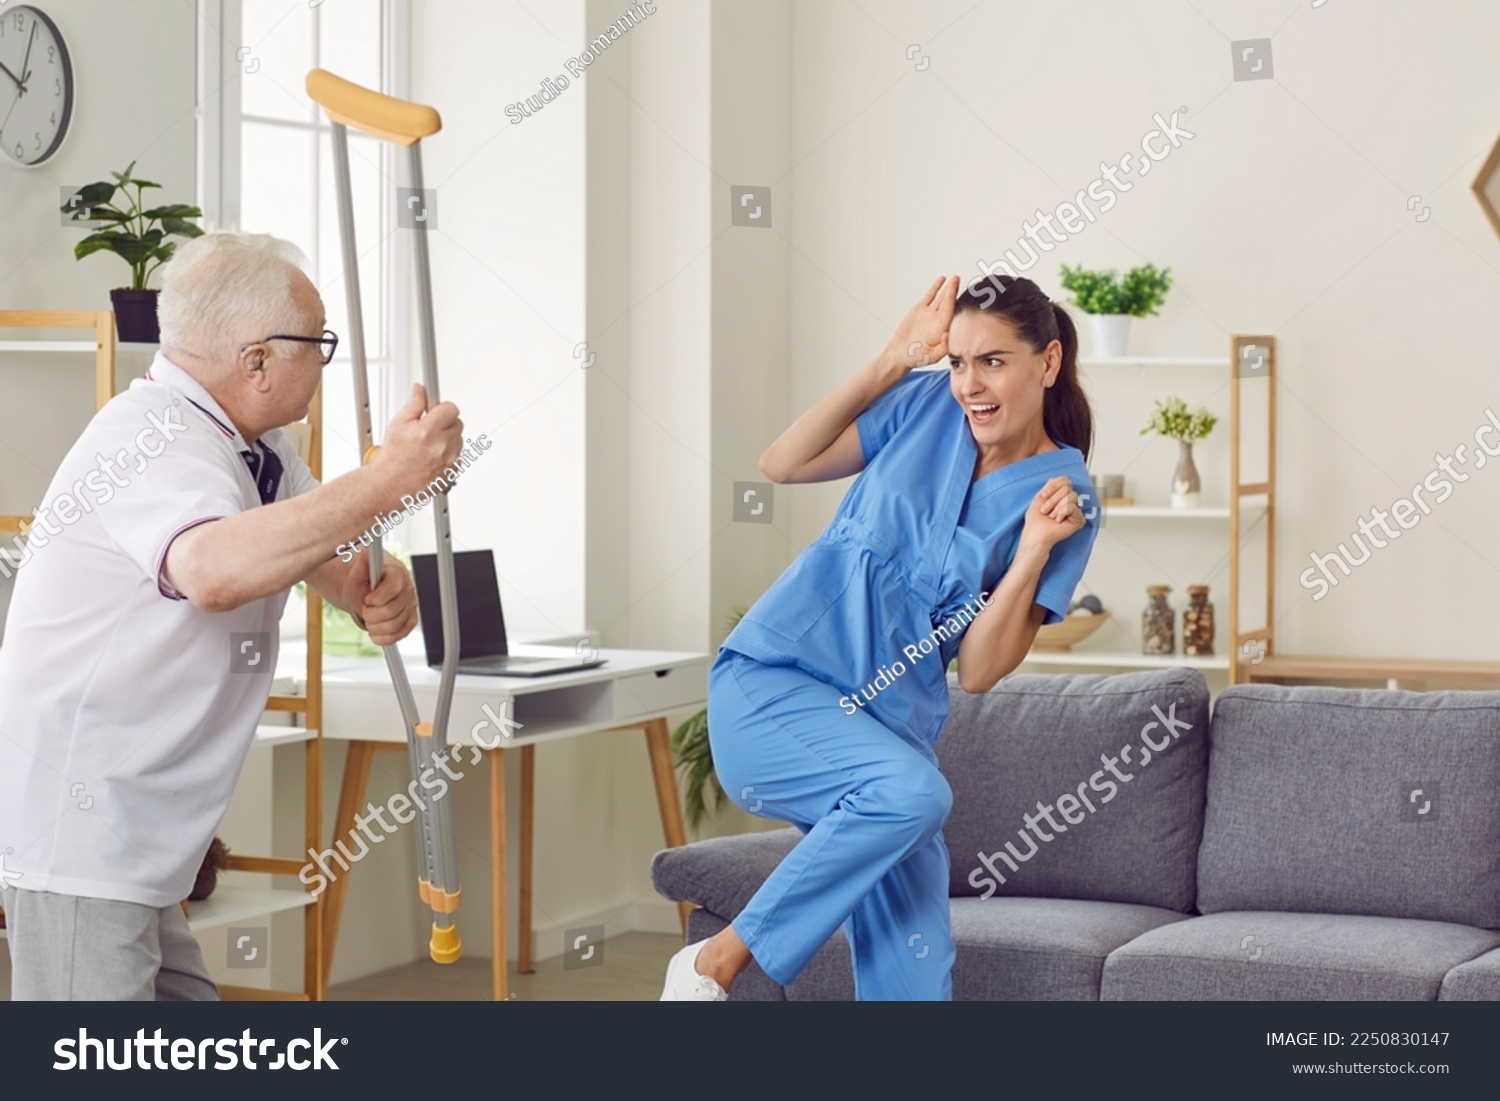 Angry aggressive elderly man threatening to his caregiver woman. Elderly patient suffering from mental disability threatening with crutch to frightened nurse. Professional medical help and support #2250830147